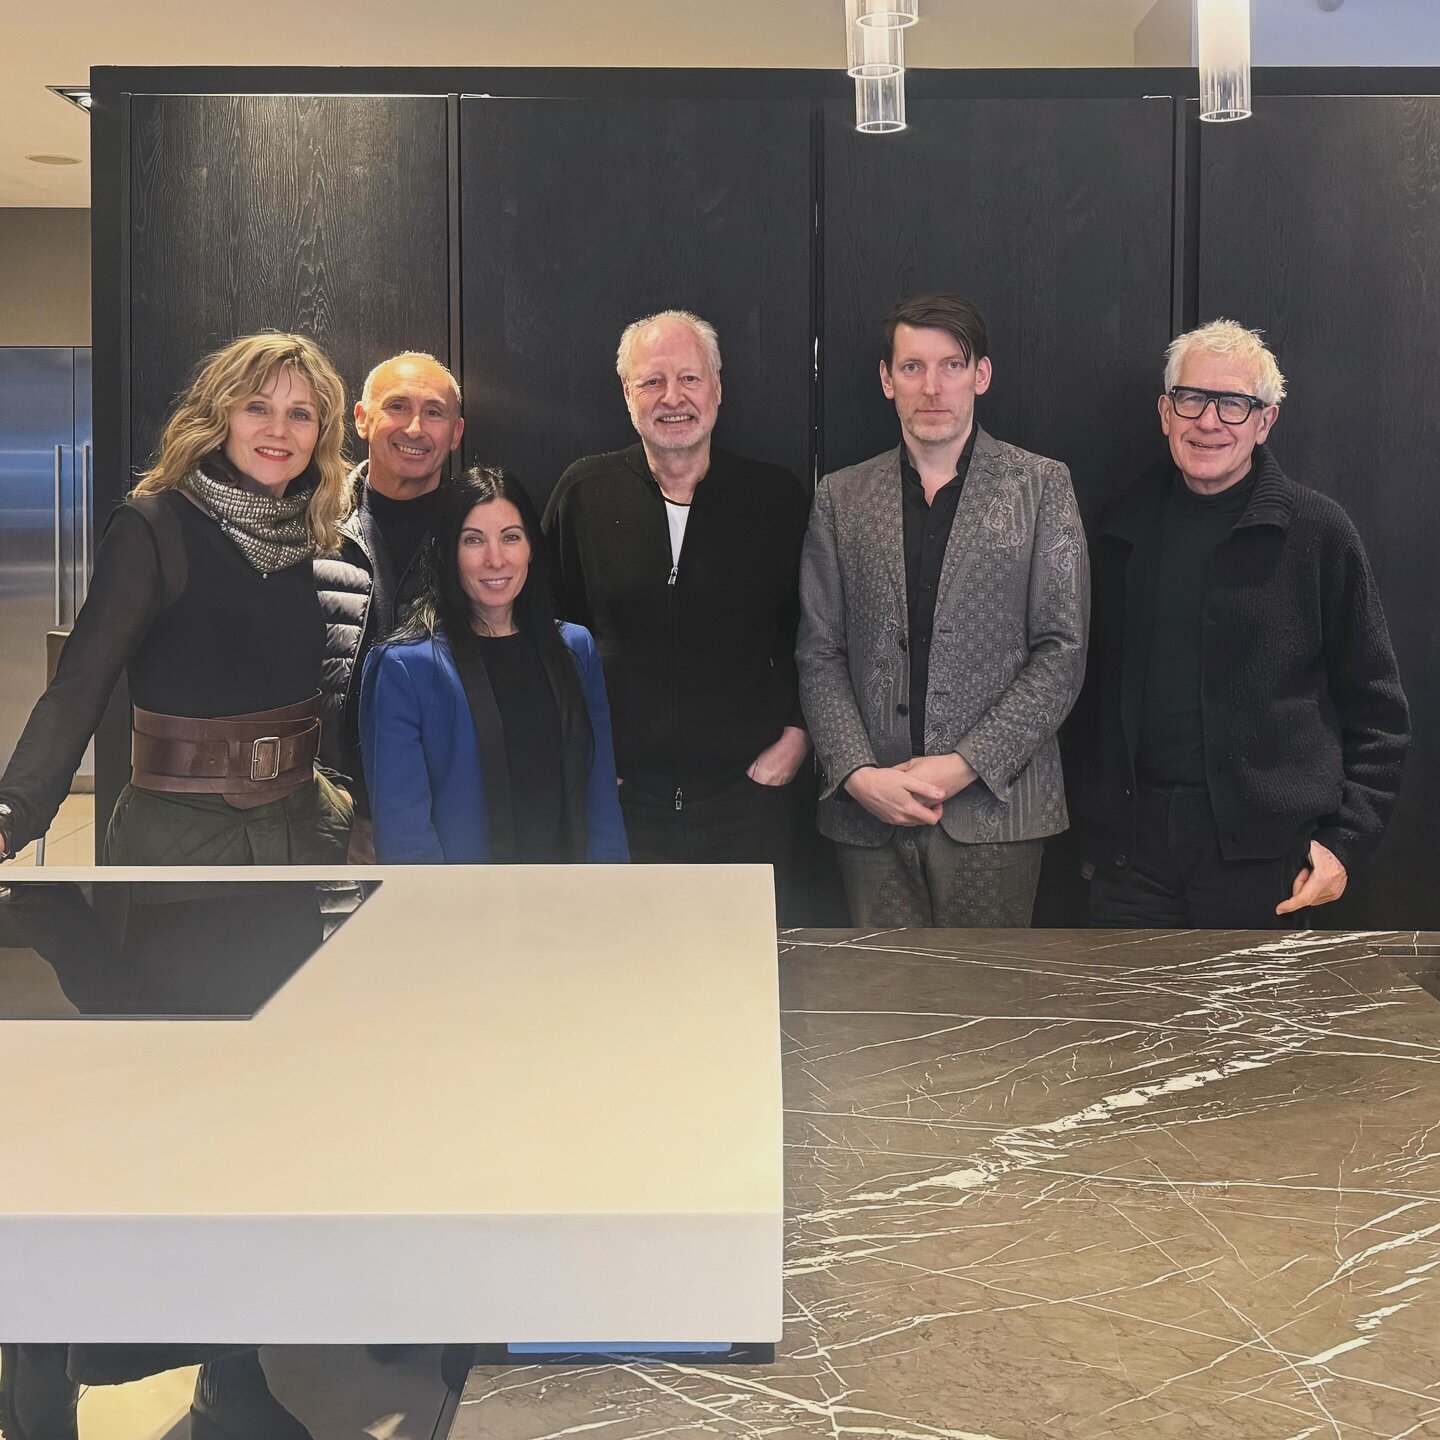 We had an excellent day yesterday hosting the @kbbreview #kbbawards judging panel at our Wigmore Street showroom. 

The members of the judging panel included the wonderful @really_lindabarker @thewoodworks @johnnygreystudios @roswilsondesign @smallbo